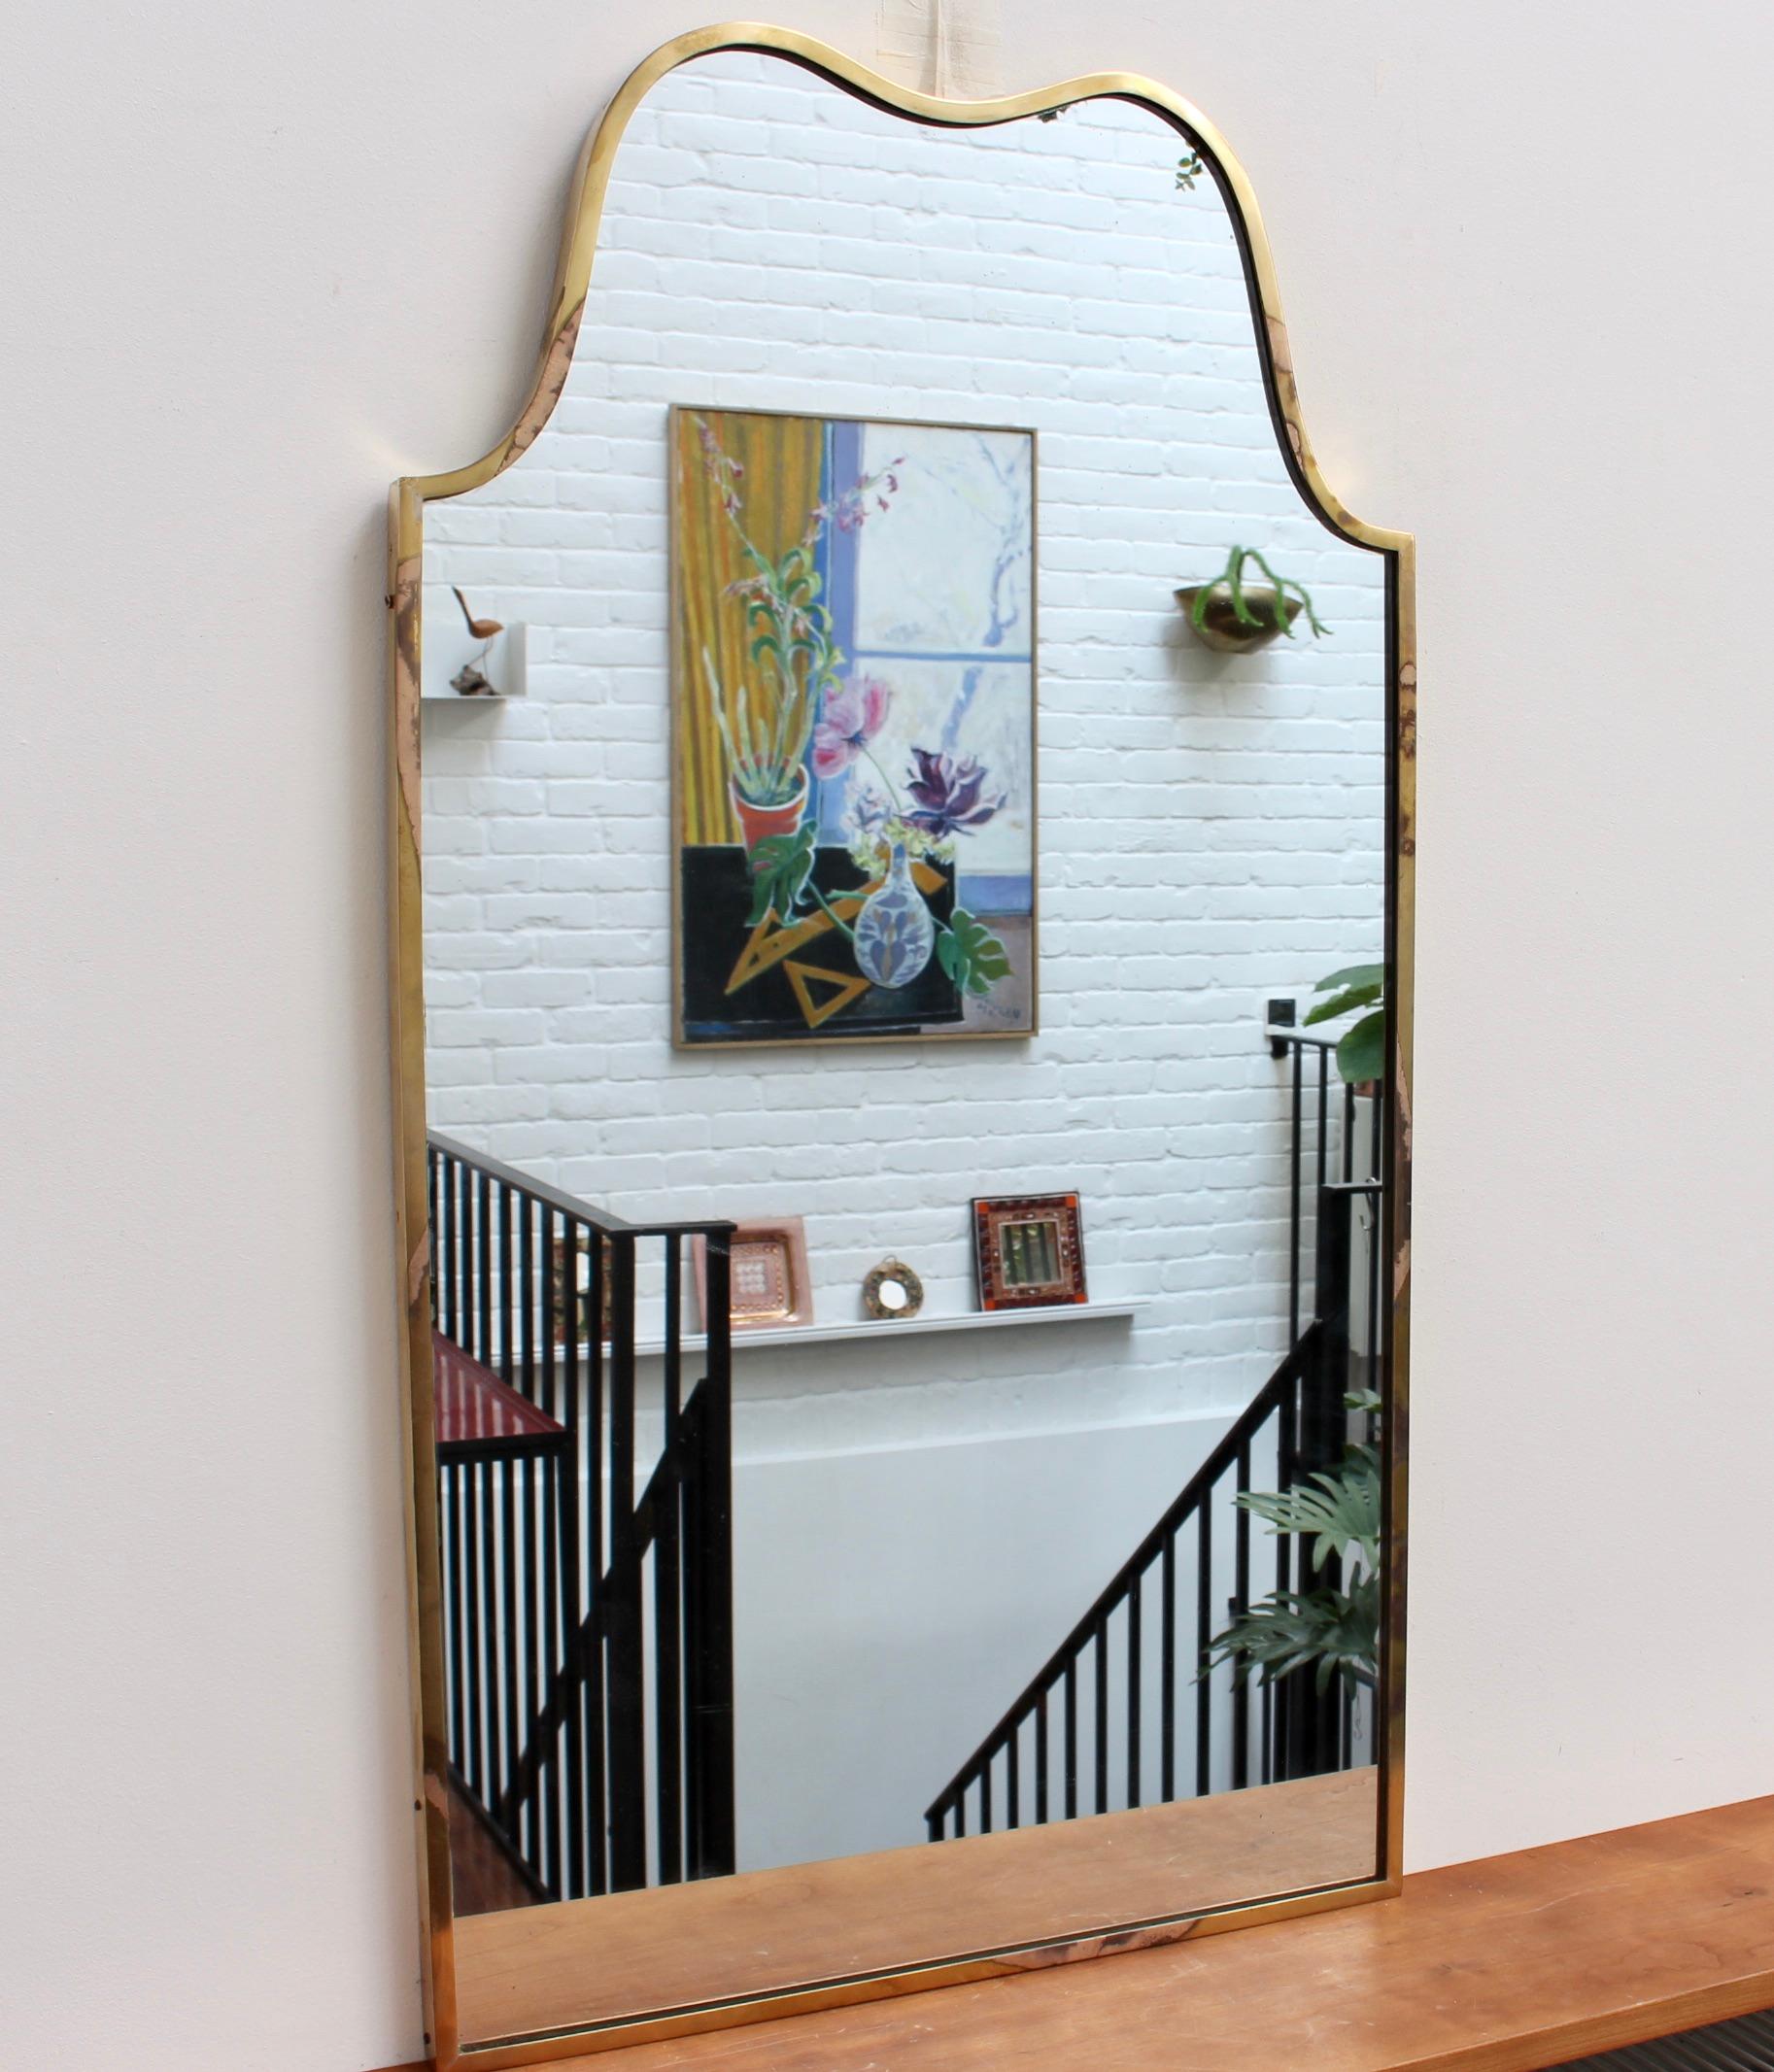 Vintage Italian wall mirror with brass frame, (circa 1950s). The unusual shape of this mirror lends it loads of character with its substantial weight and sensuous curves crowning the piece. It exudes personality, solidity, weightiness and has